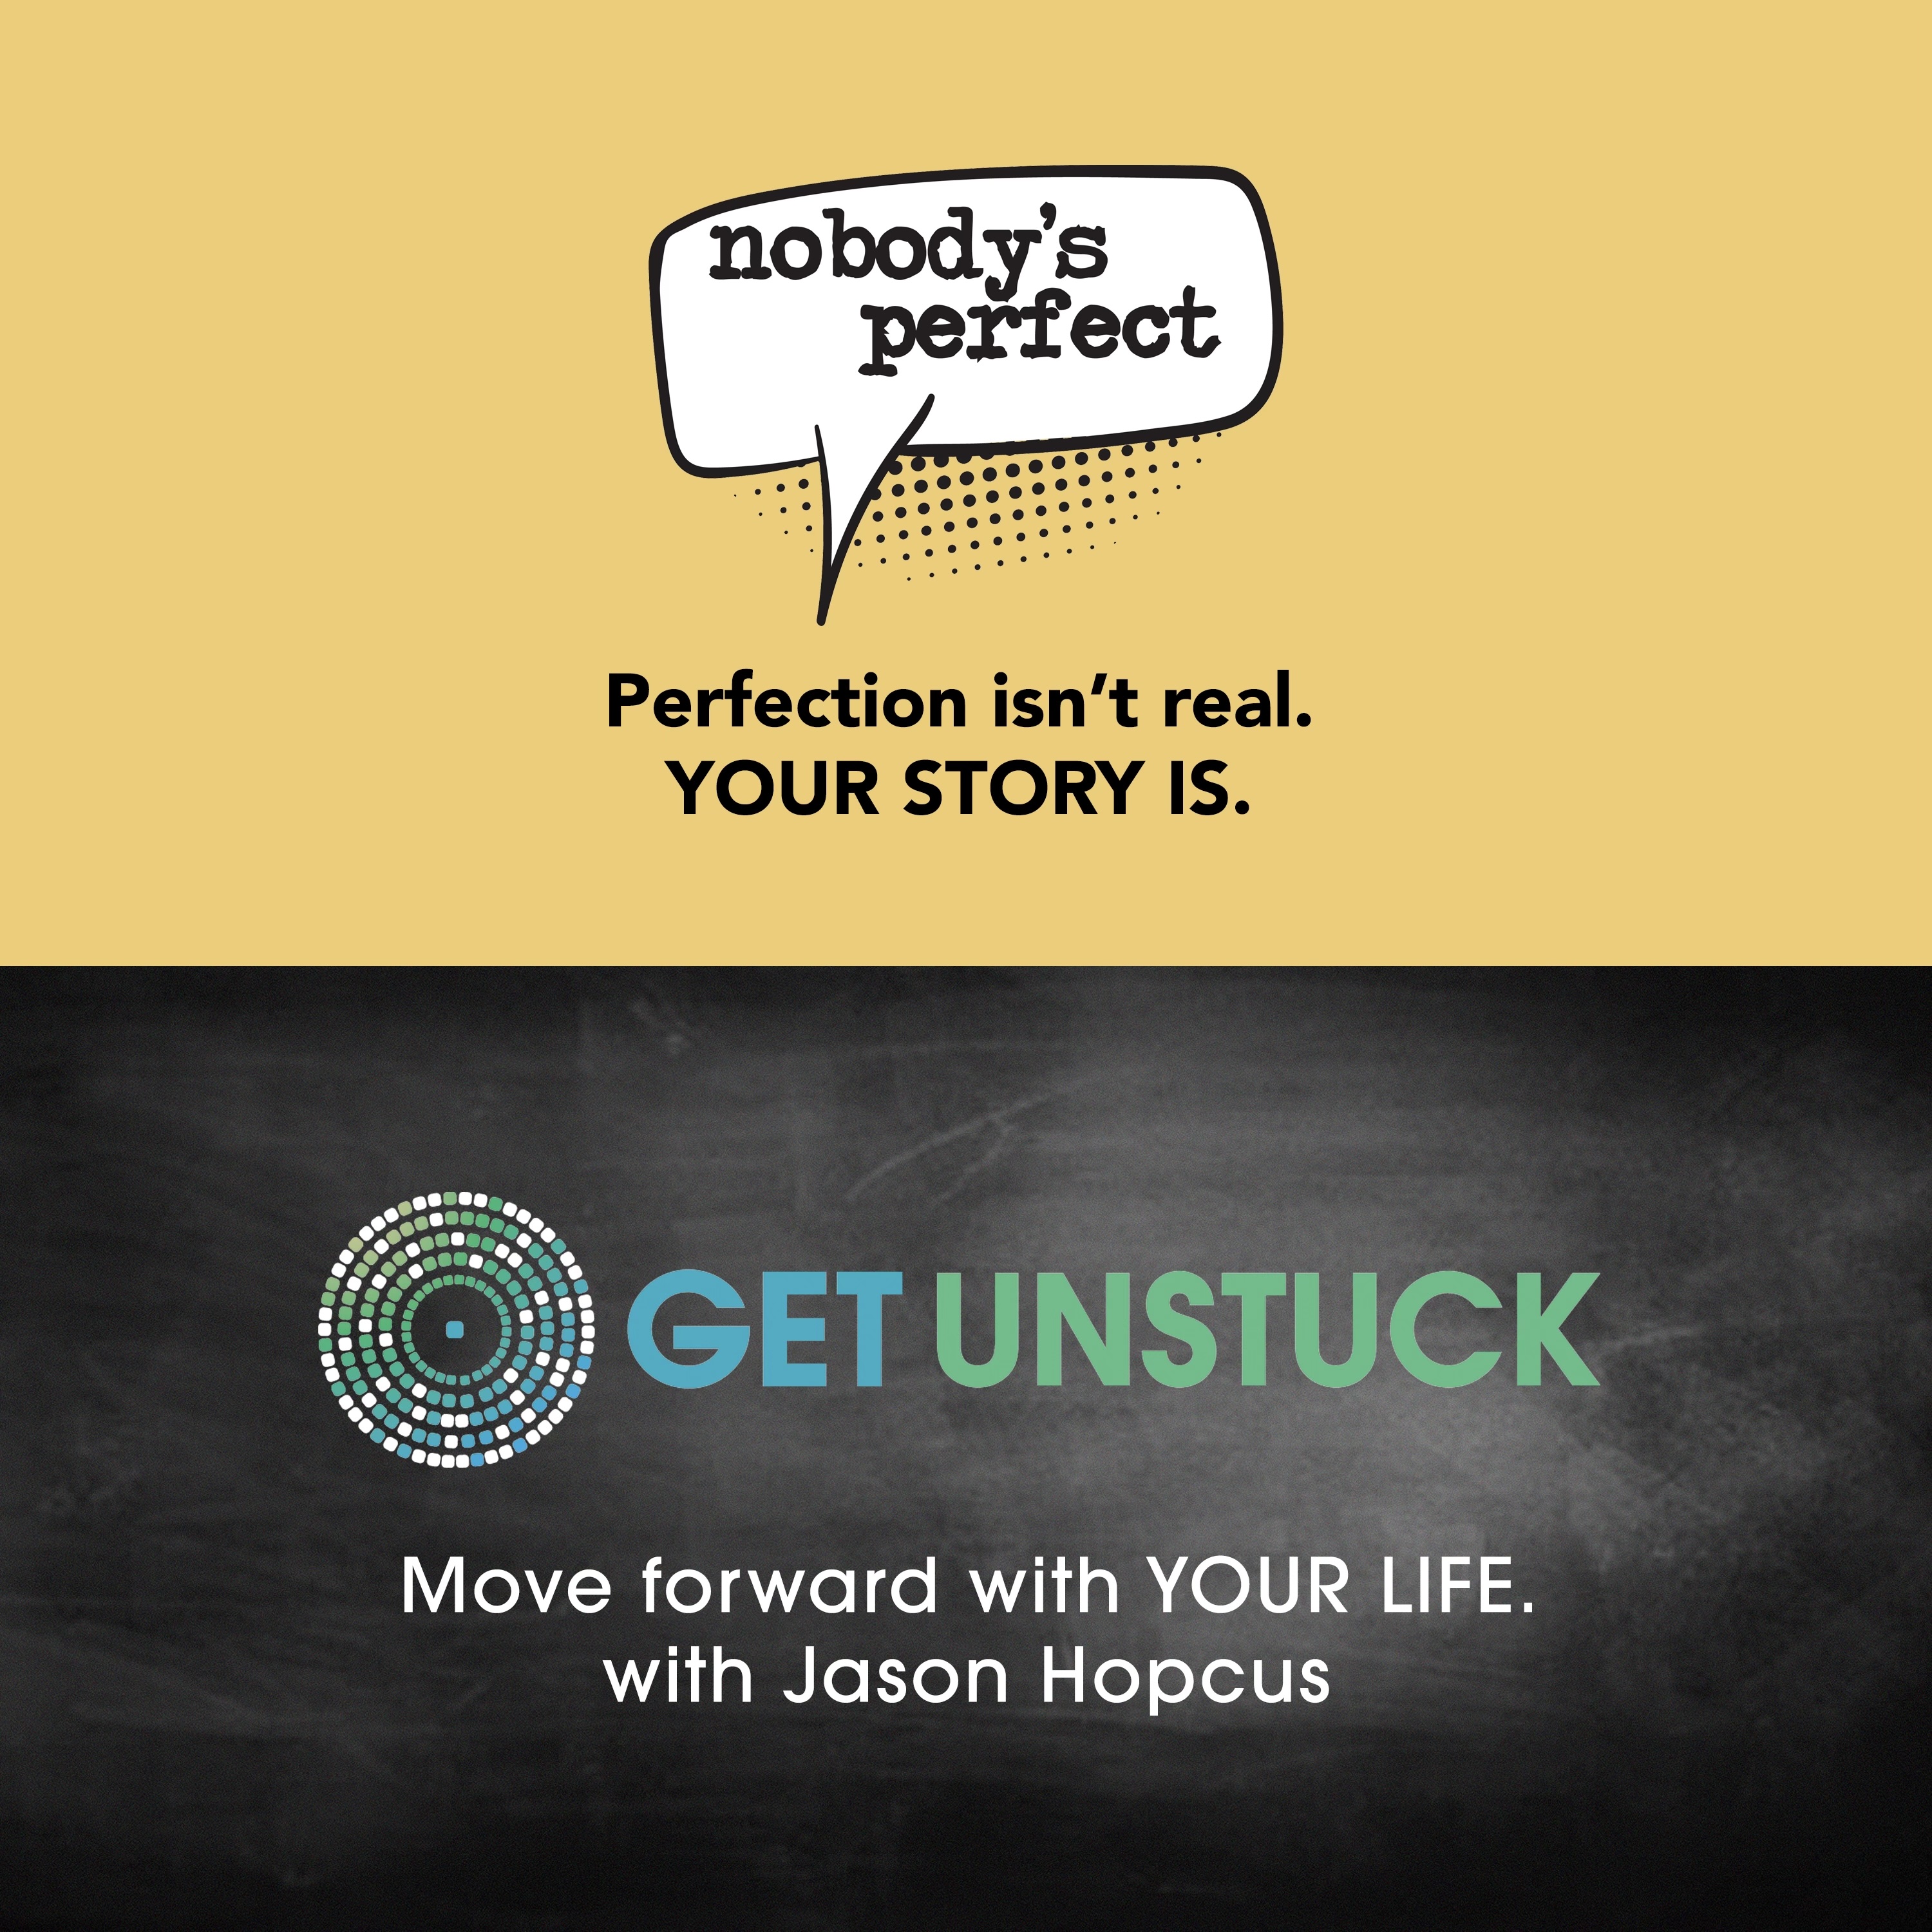 Get Unstuck. Move Forward with Your Life/Nobody's Perfect